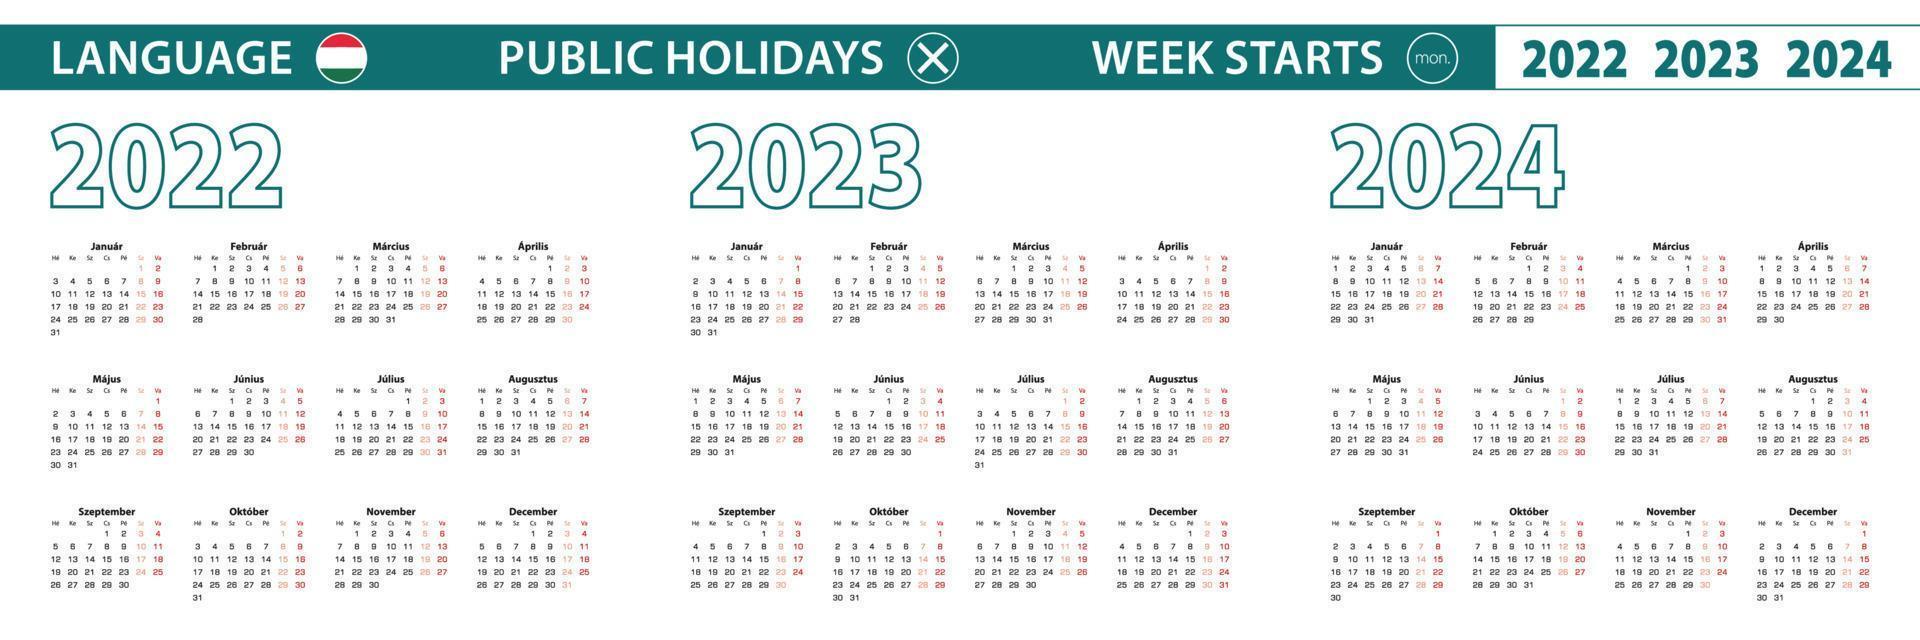 Simple calendar template in Hungarian for 2022, 2023, 2024 years. Week starts from Monday. vector